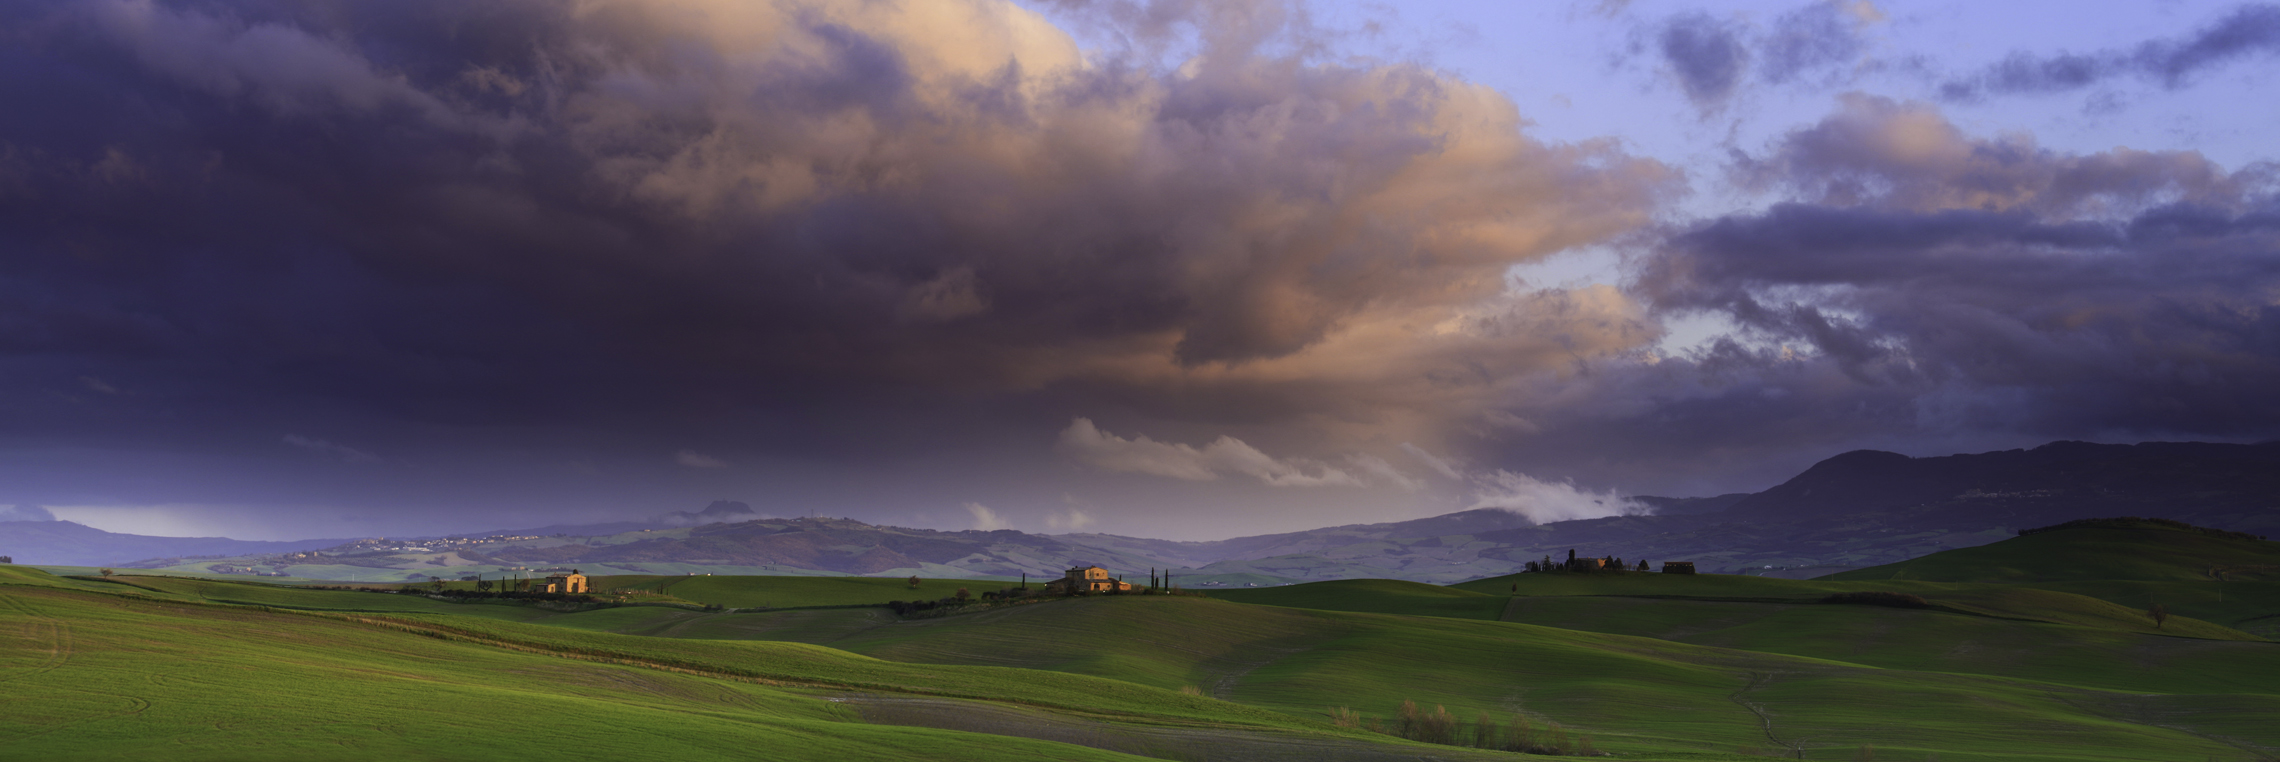 Tuscany - Val d'Orcia	...